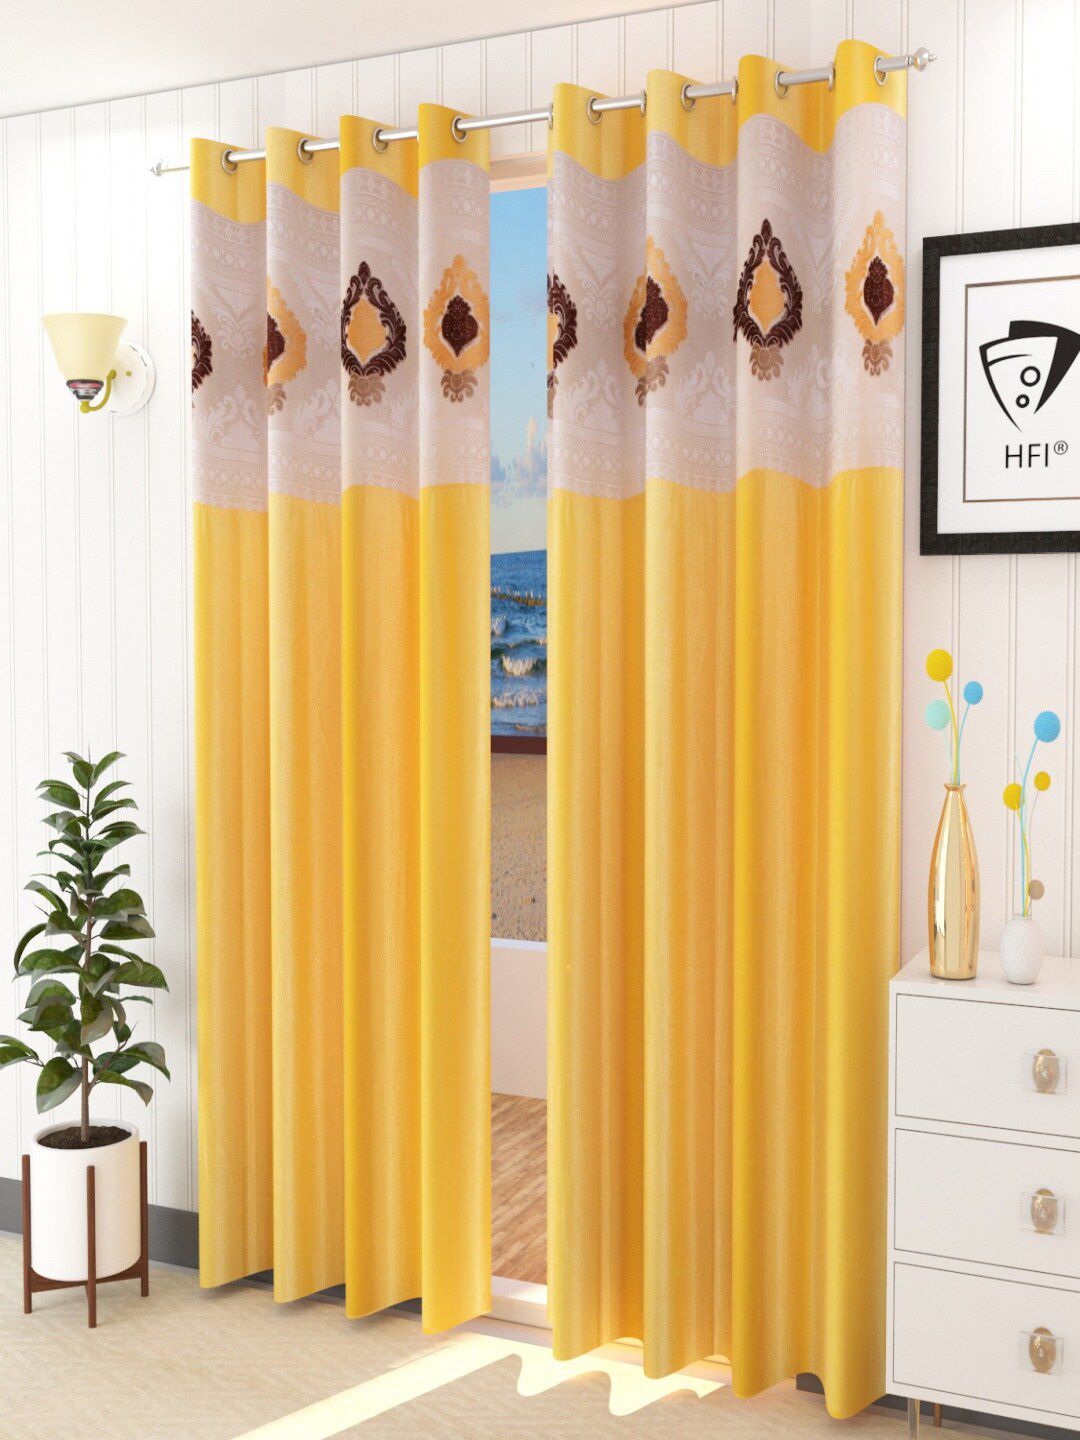 Homefab India Yellow & White Set of 2 Sheer Long Door Curtain Price in India